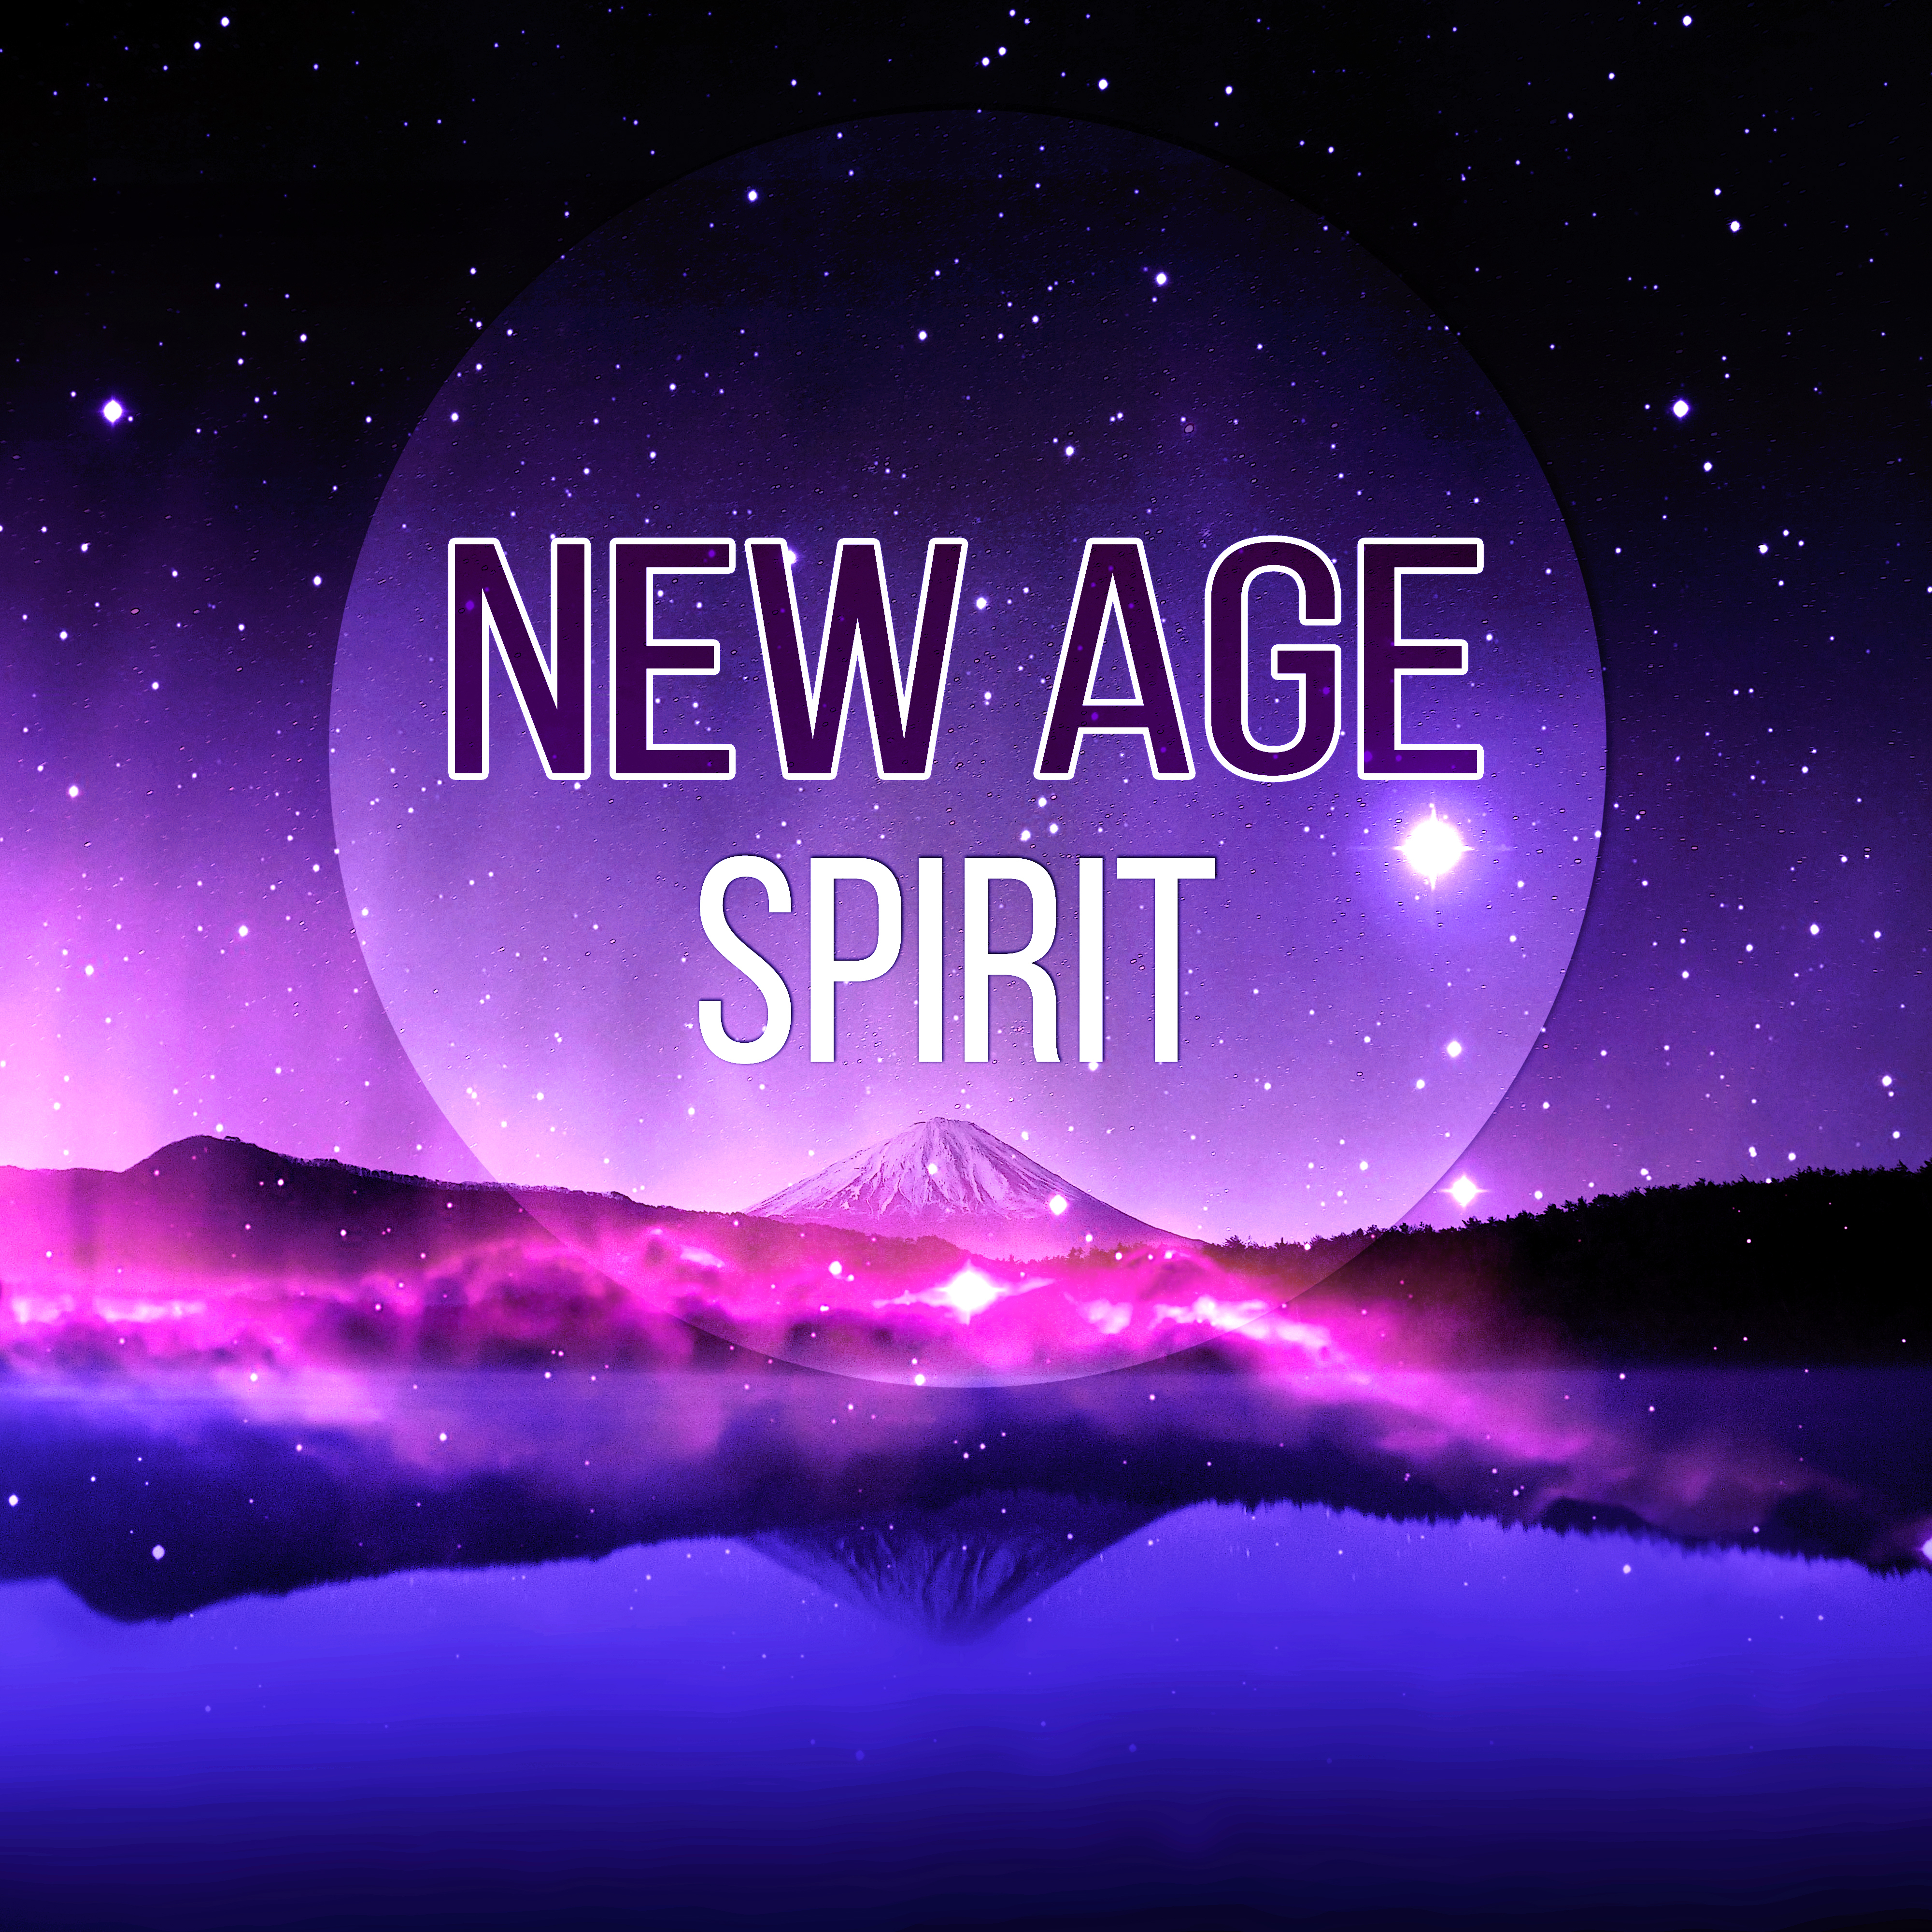 New Age Spirit - Yoga Relaxing Meditation Music, Mind and Soul, Spirited Sensual Sounds for Yoga Practice and Pilates Exercises, Instrumental and Nature Sounds